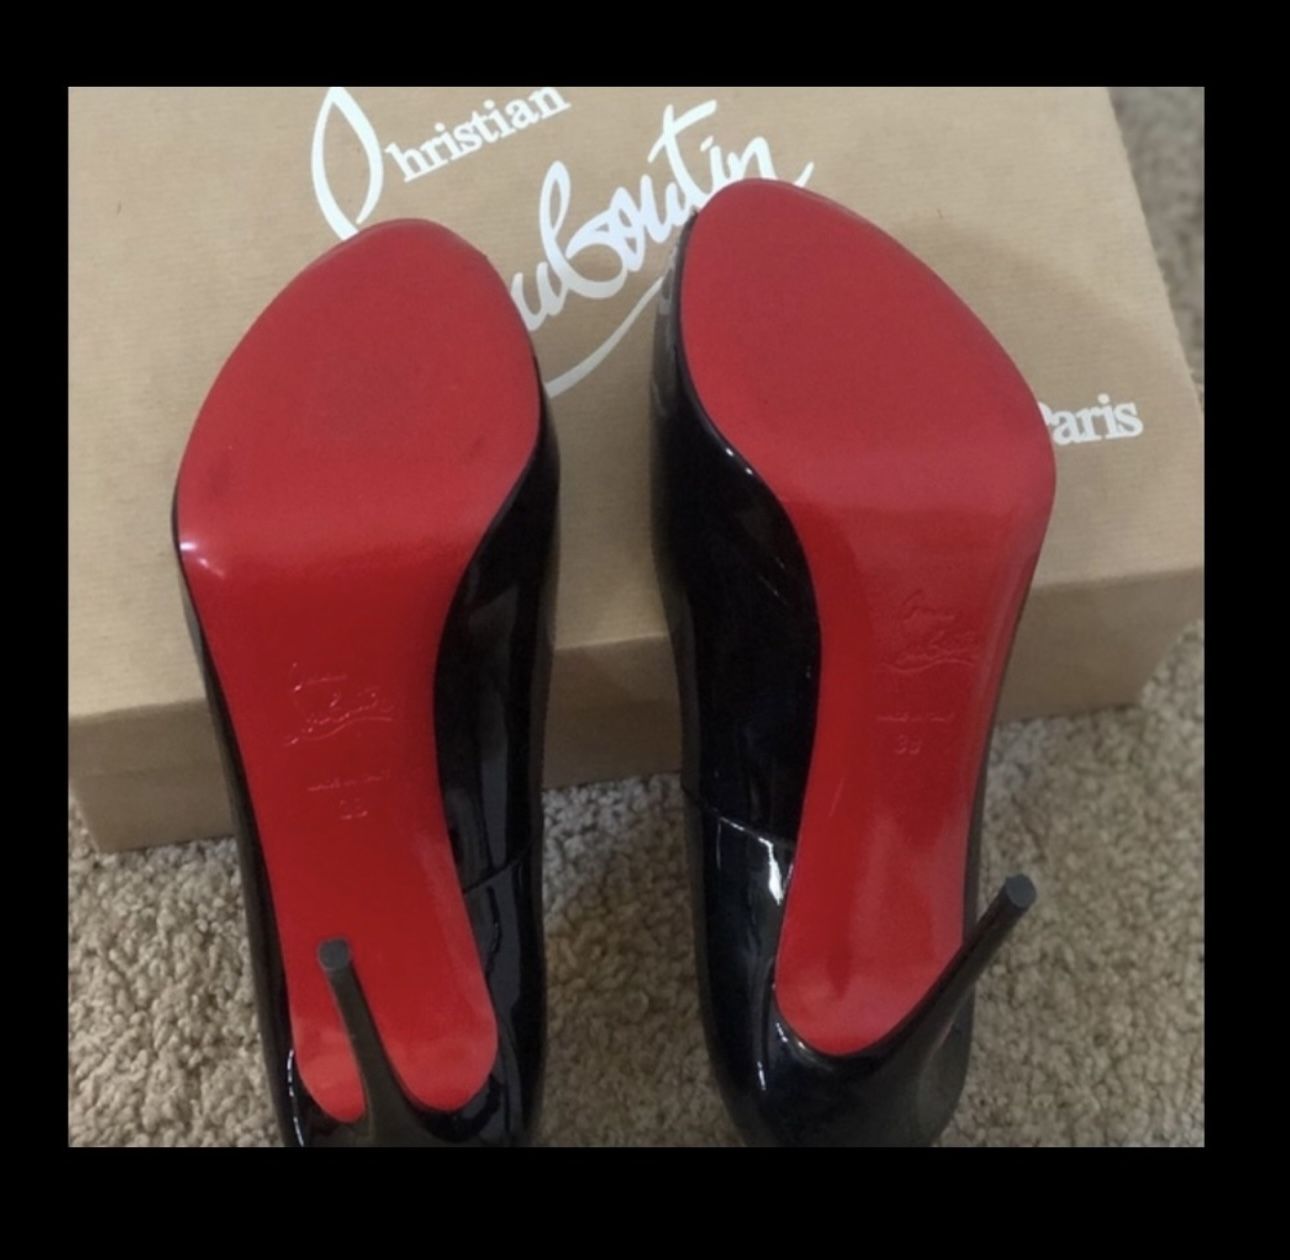 Christian Louboutin Very Prive 120 patent